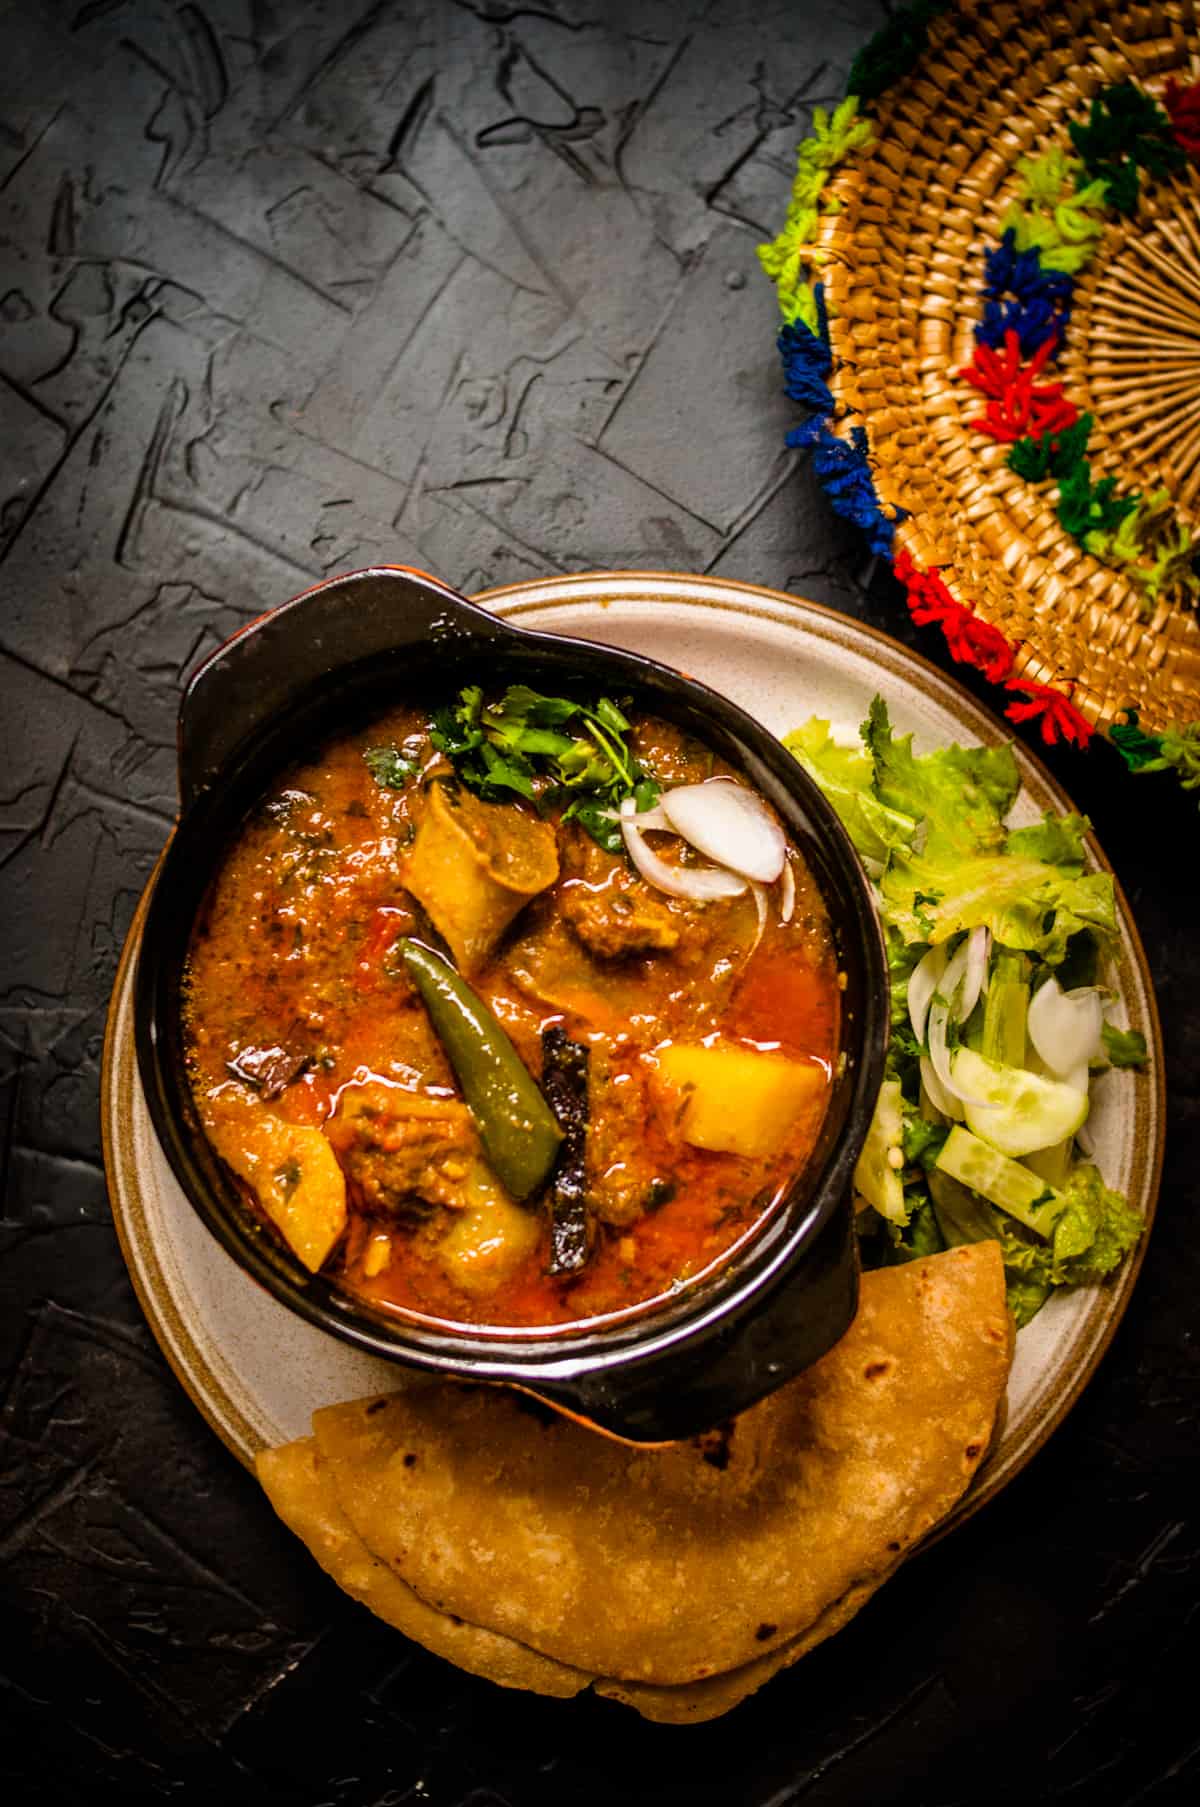 Aloo gosht served in a small clay pot with roti and salad on the side.